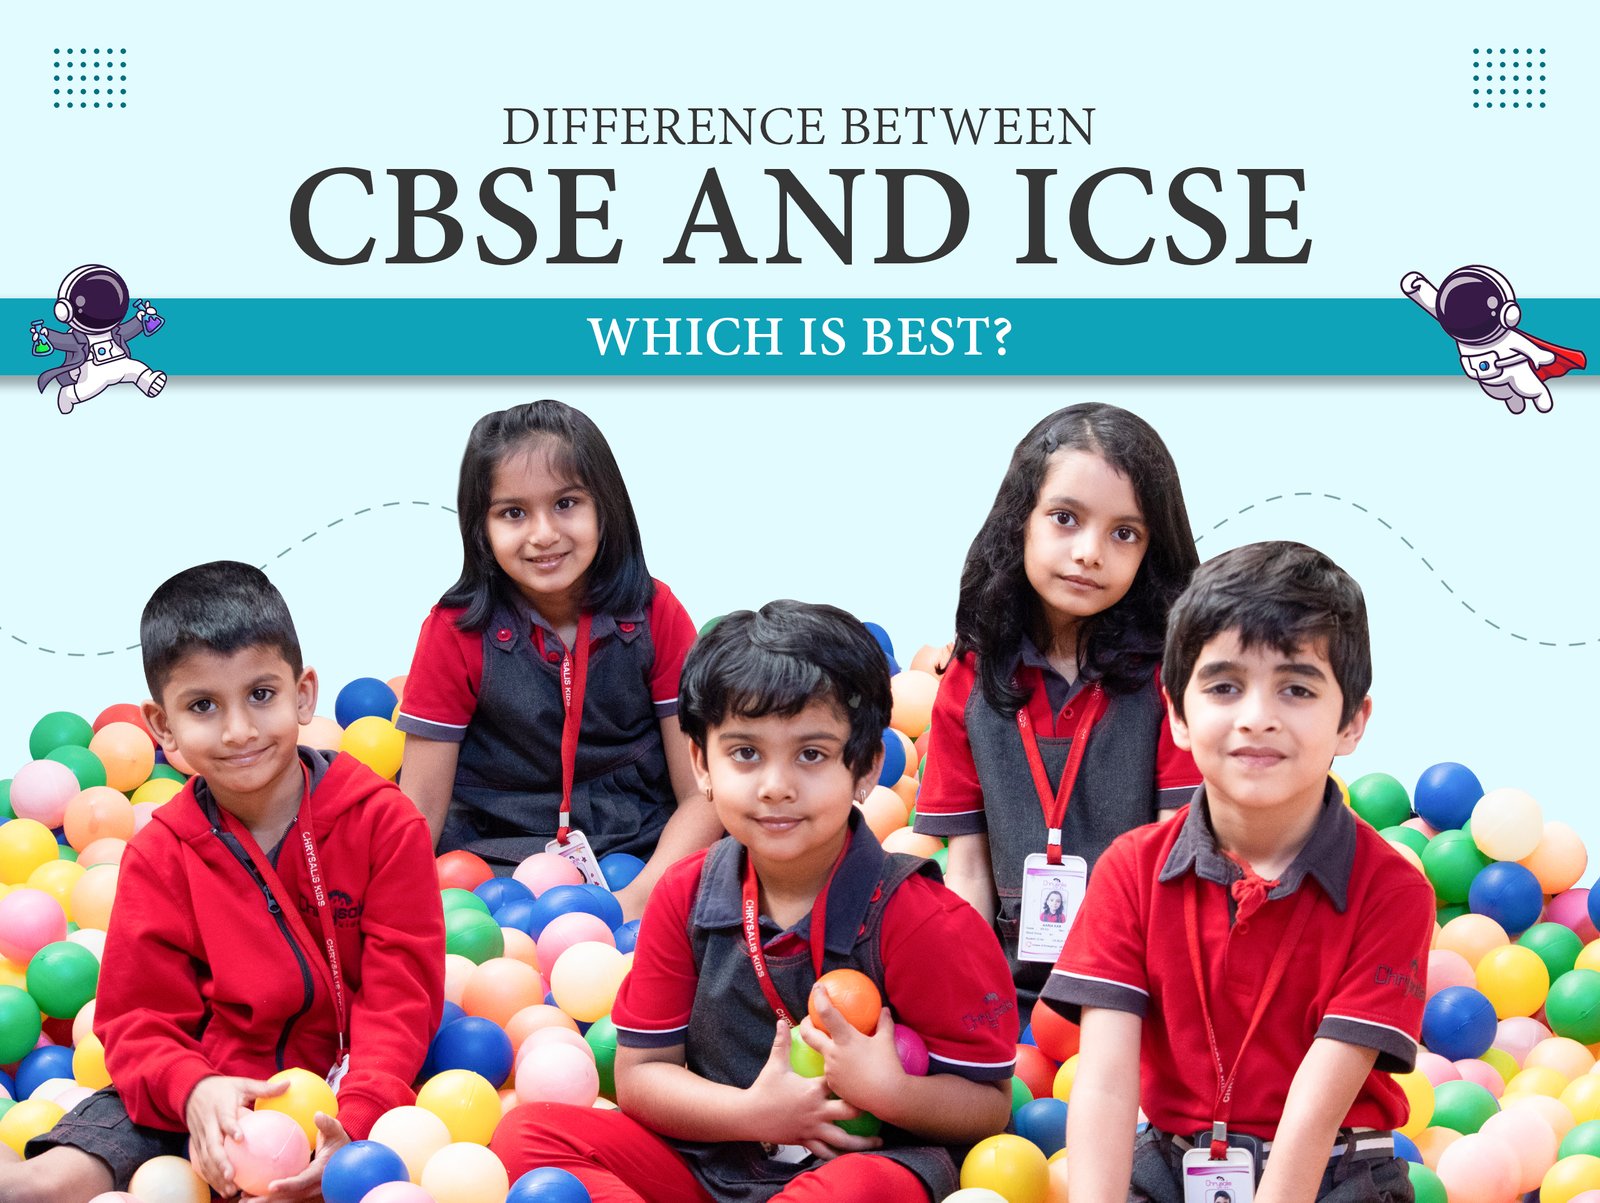 Difference between CBSE and ICSE poster